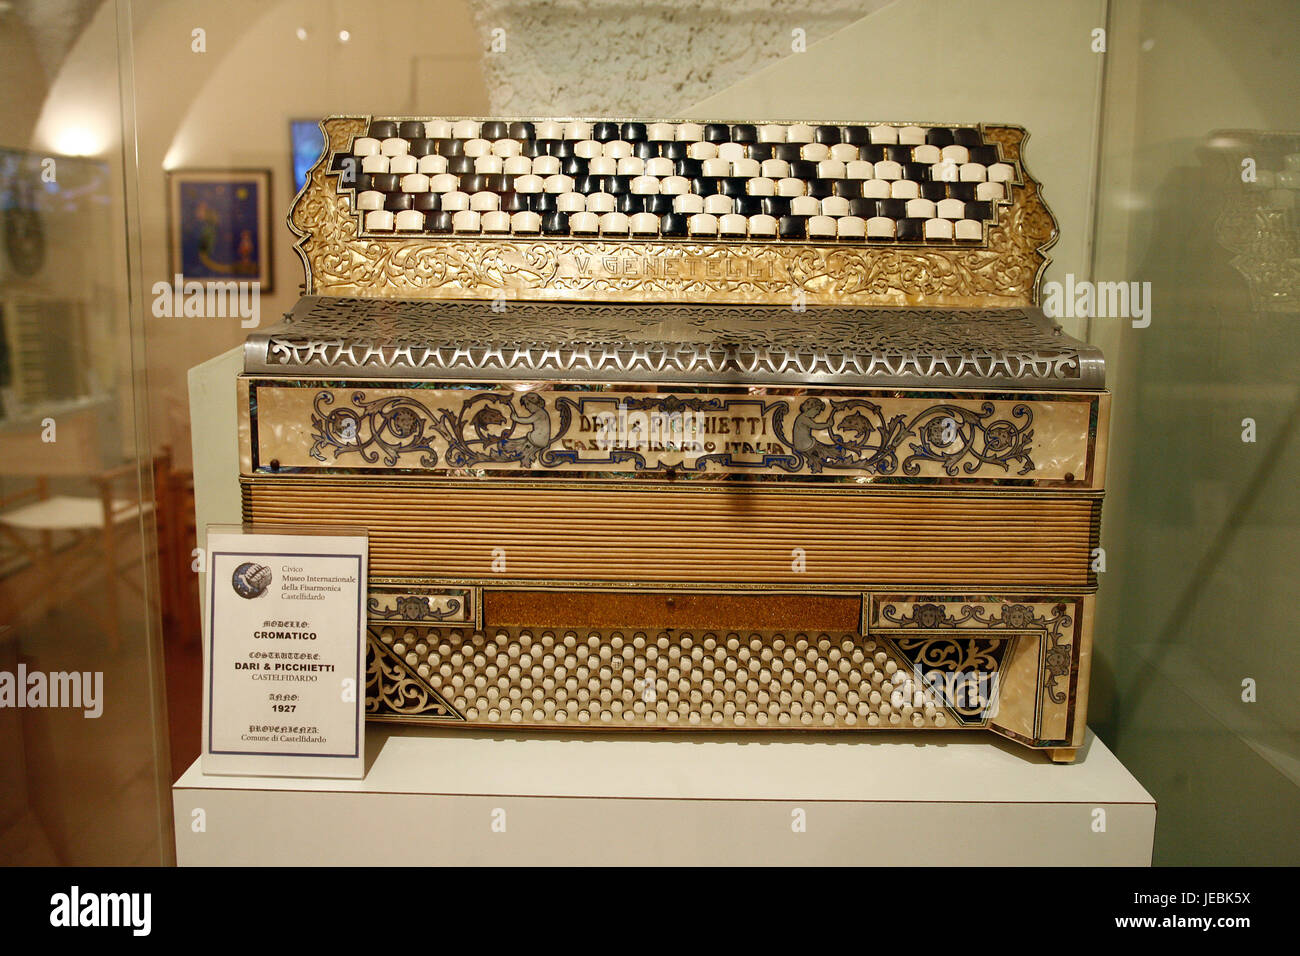 Italy Marche Castelfidardo (AN): Civic International Museum of Accordion. Exposition of ancient accordions. Stock Photo